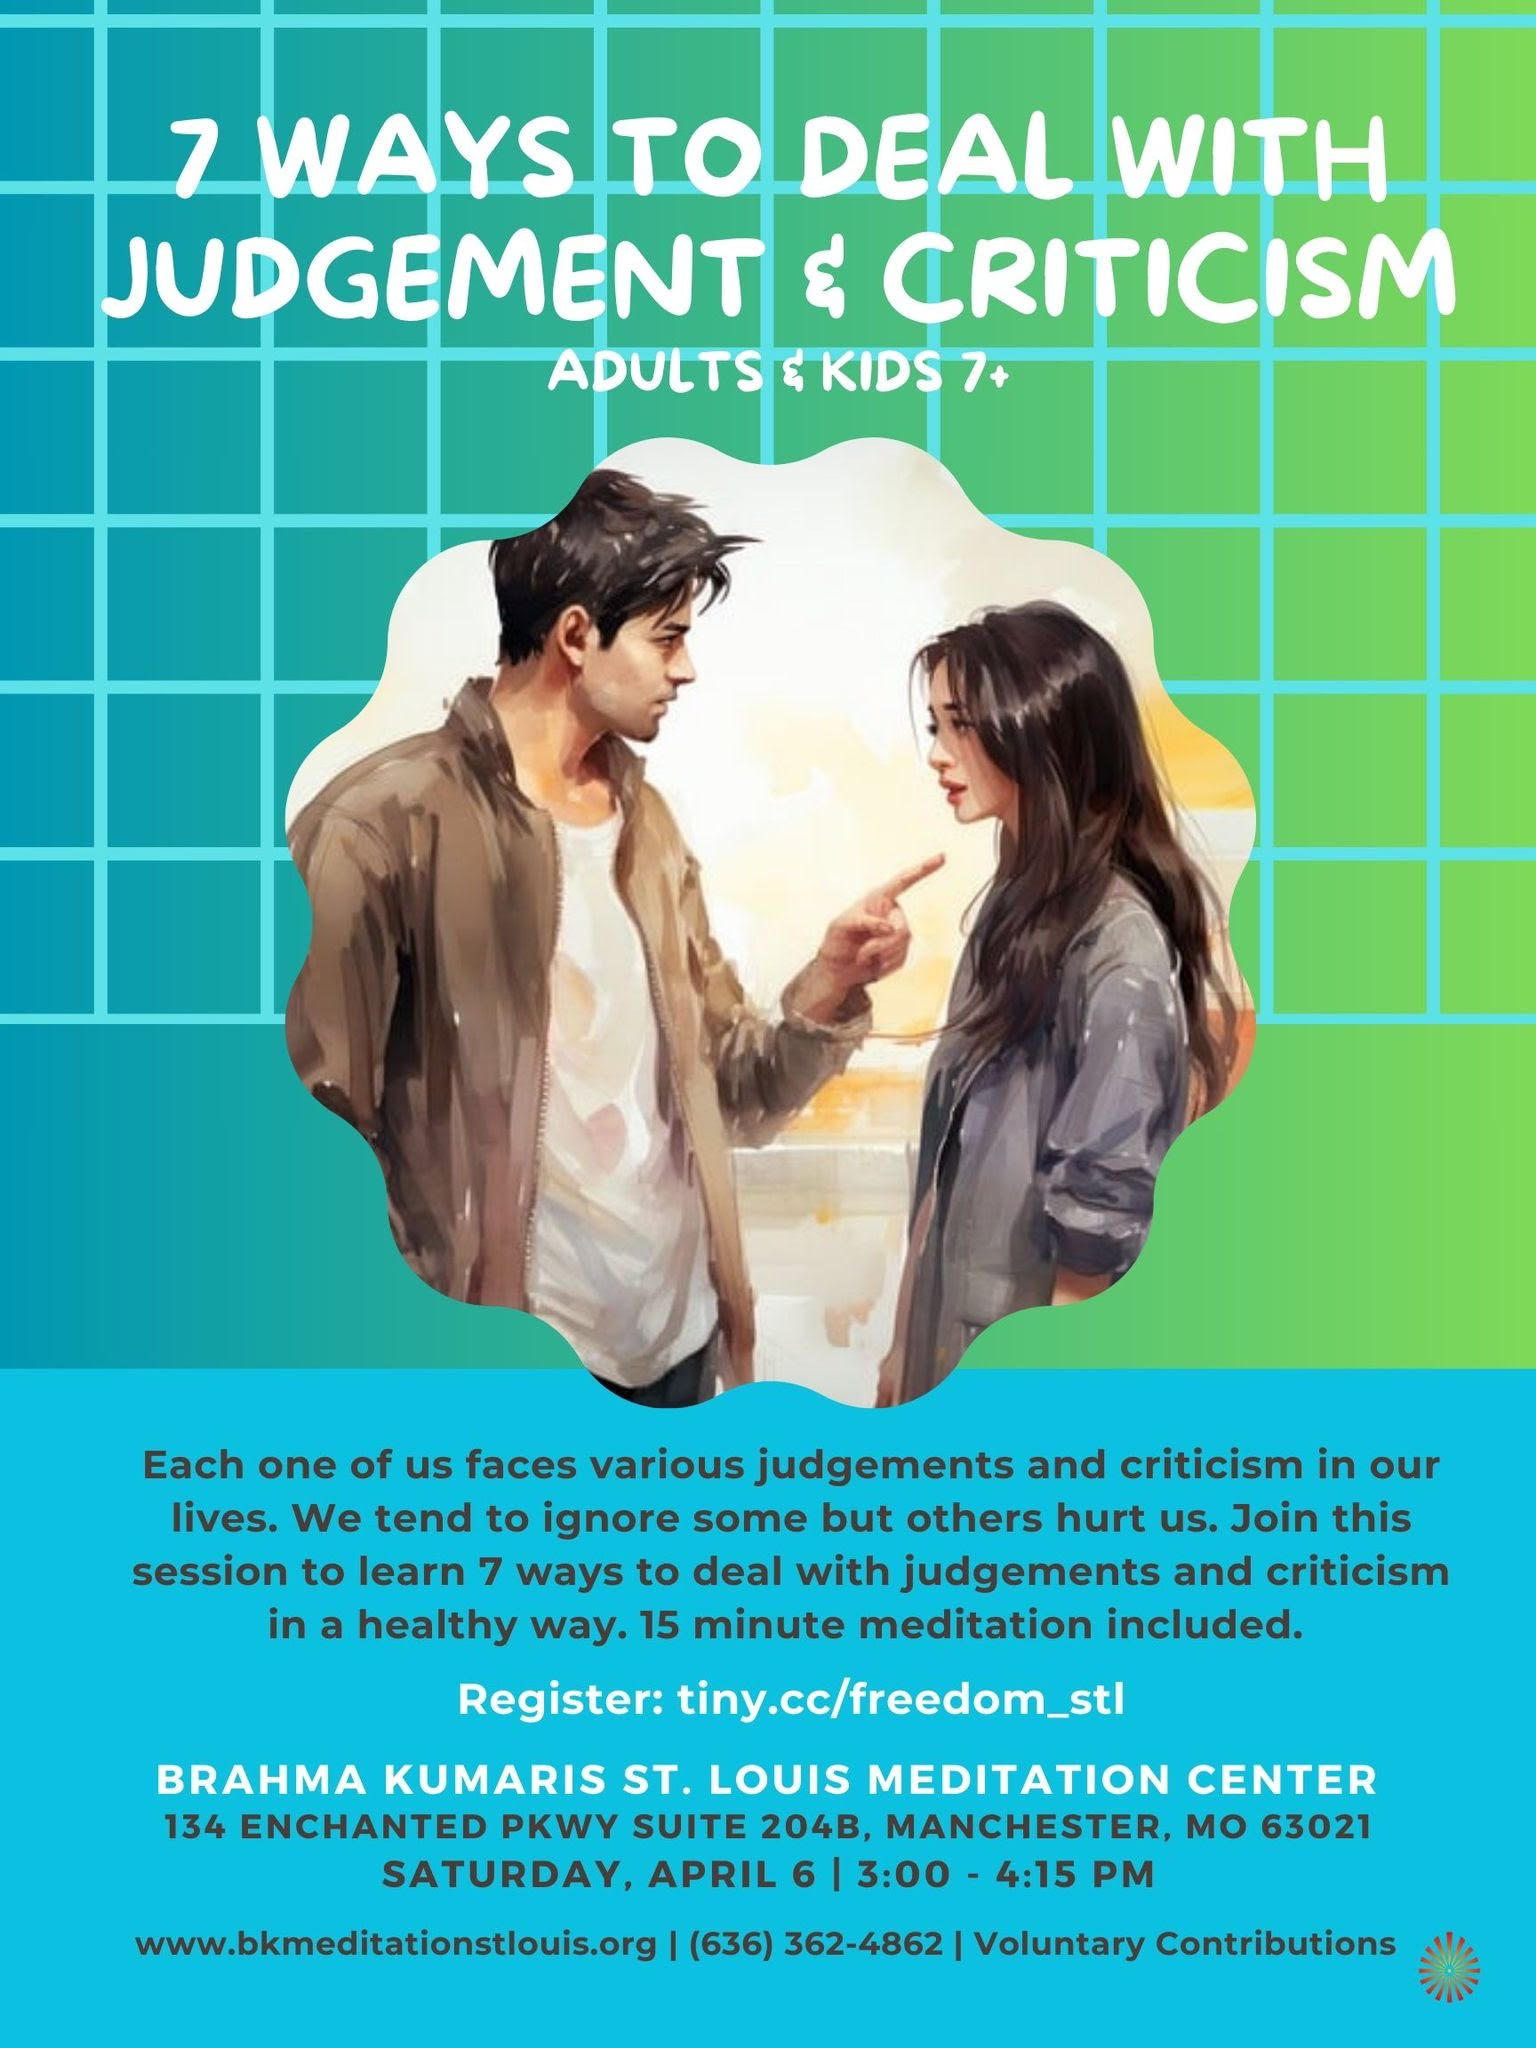 7 Ways to Deal with Judgment and Criticism